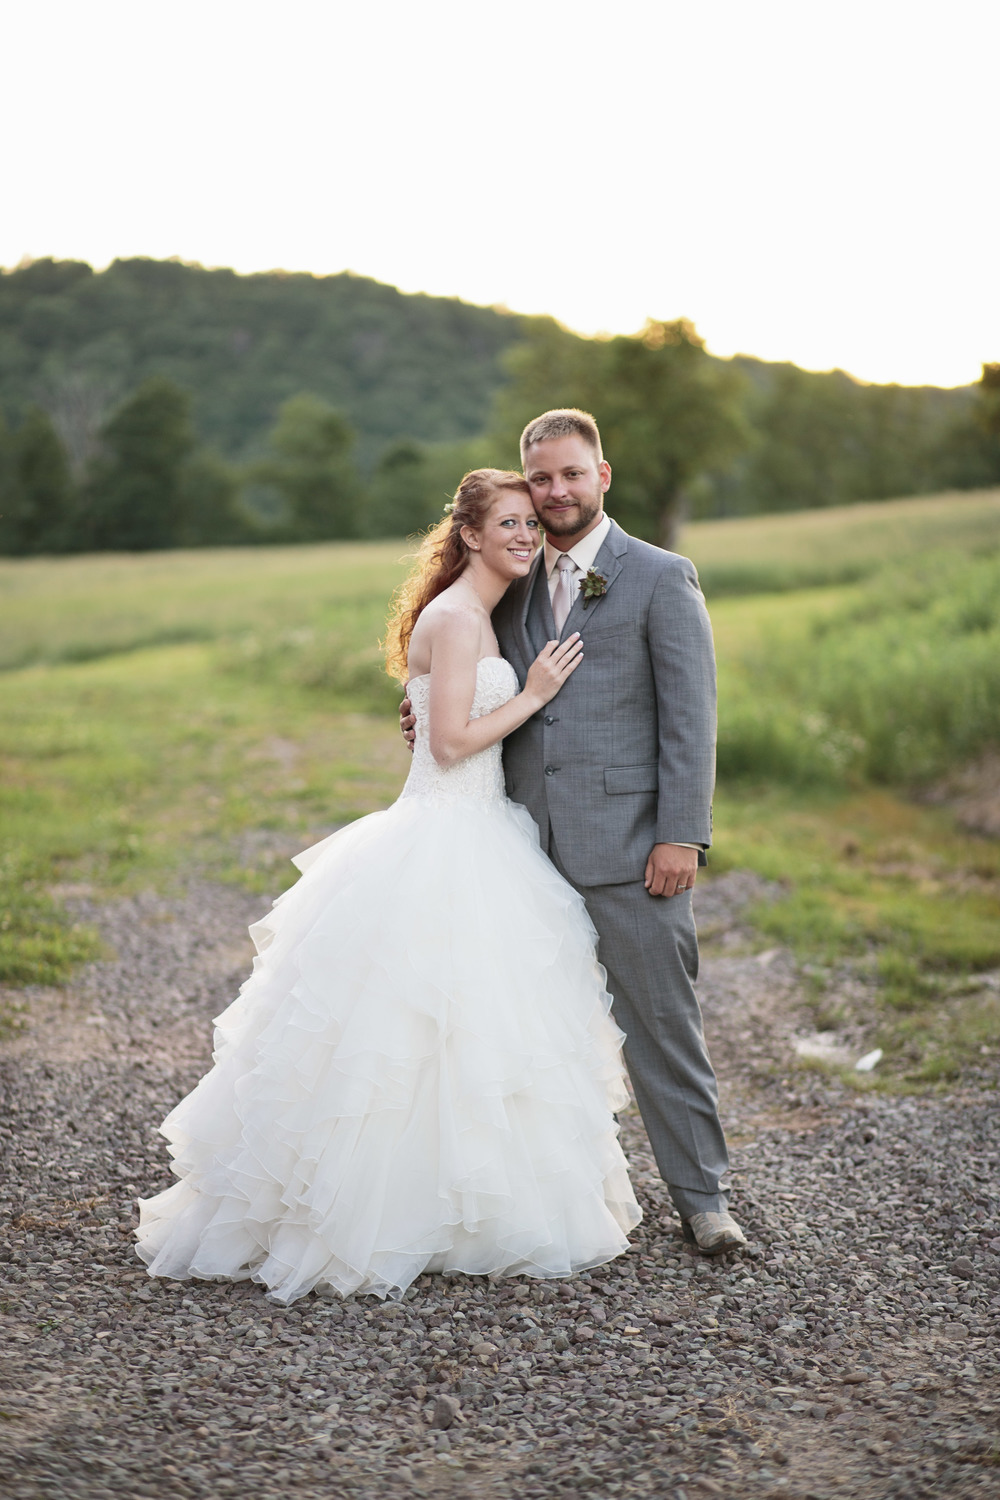 Lauren and Patrick’s rustic farm wedding took place in the mountains of beautiful Andes, New York. Photographs by Hudson-Nichols Photography.